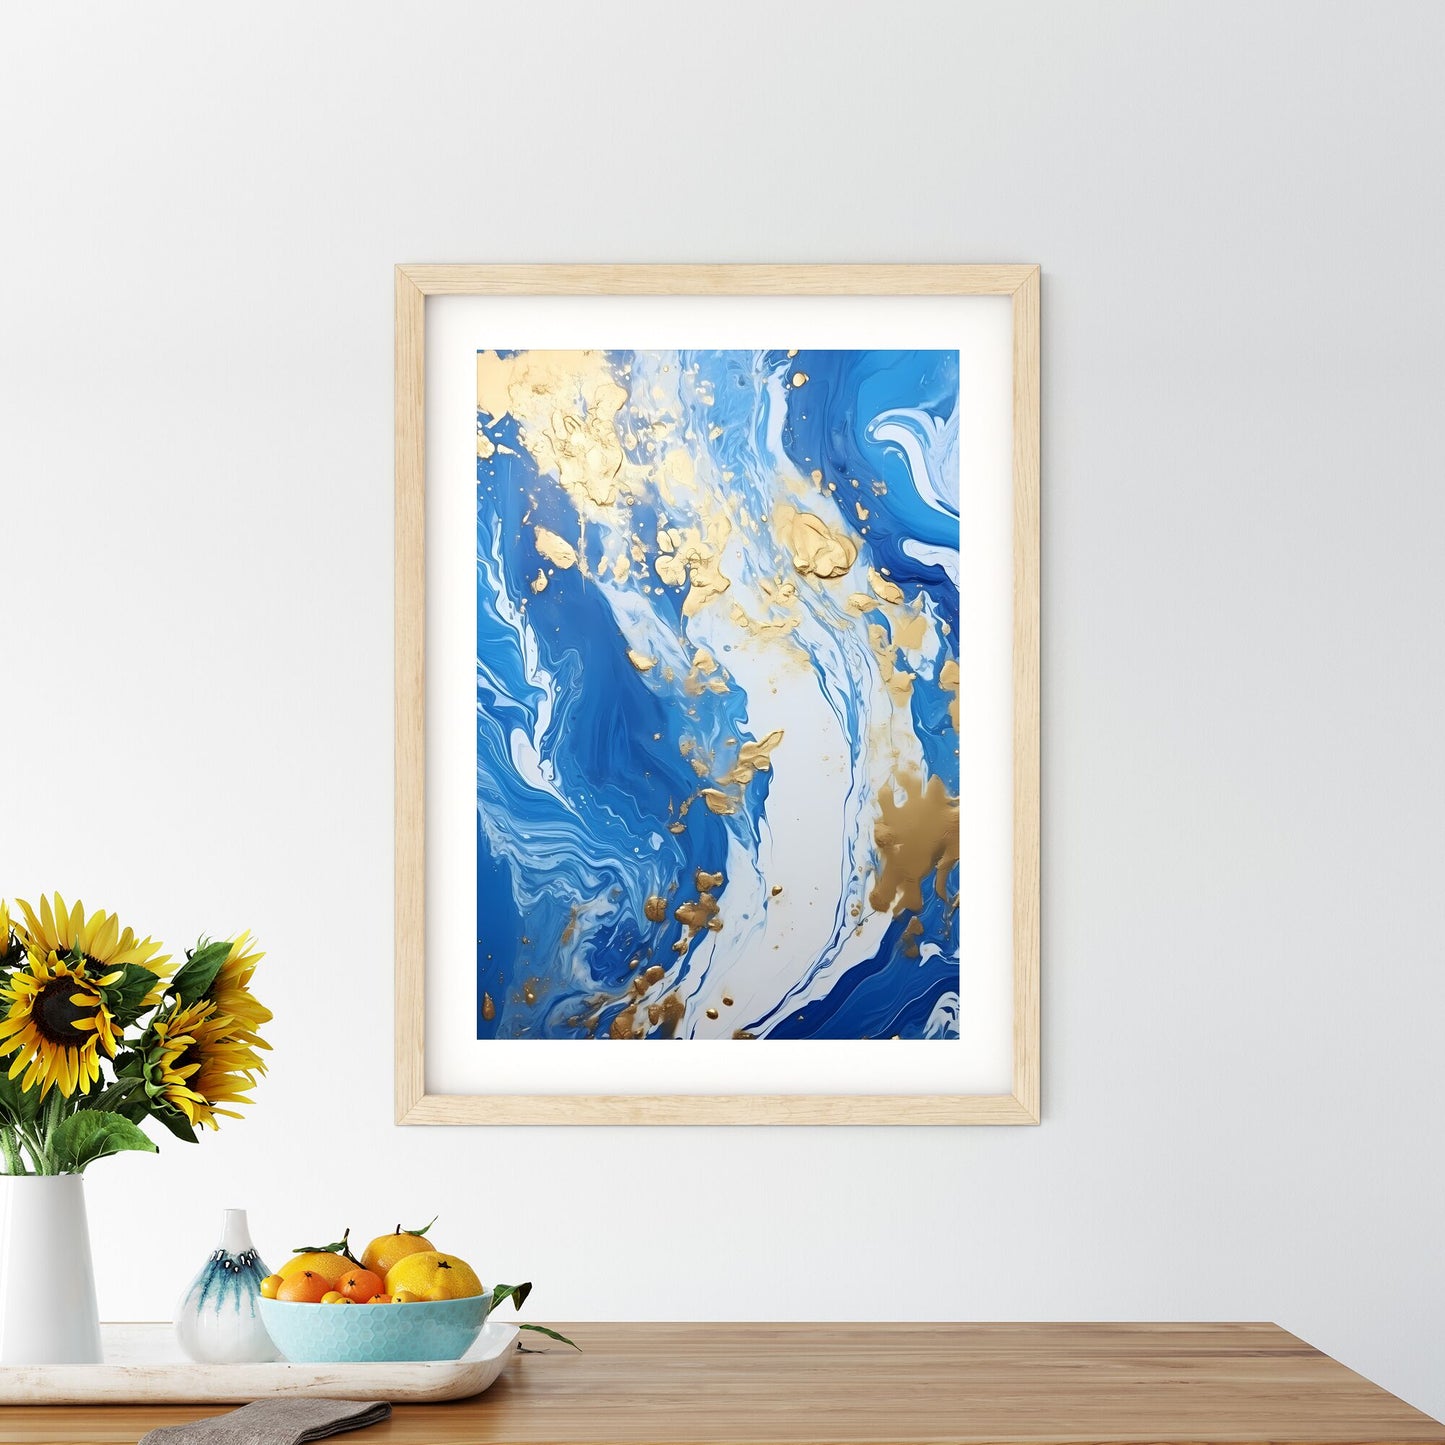 Blue And White Liquid With Gold Splatters Art Print Default Title